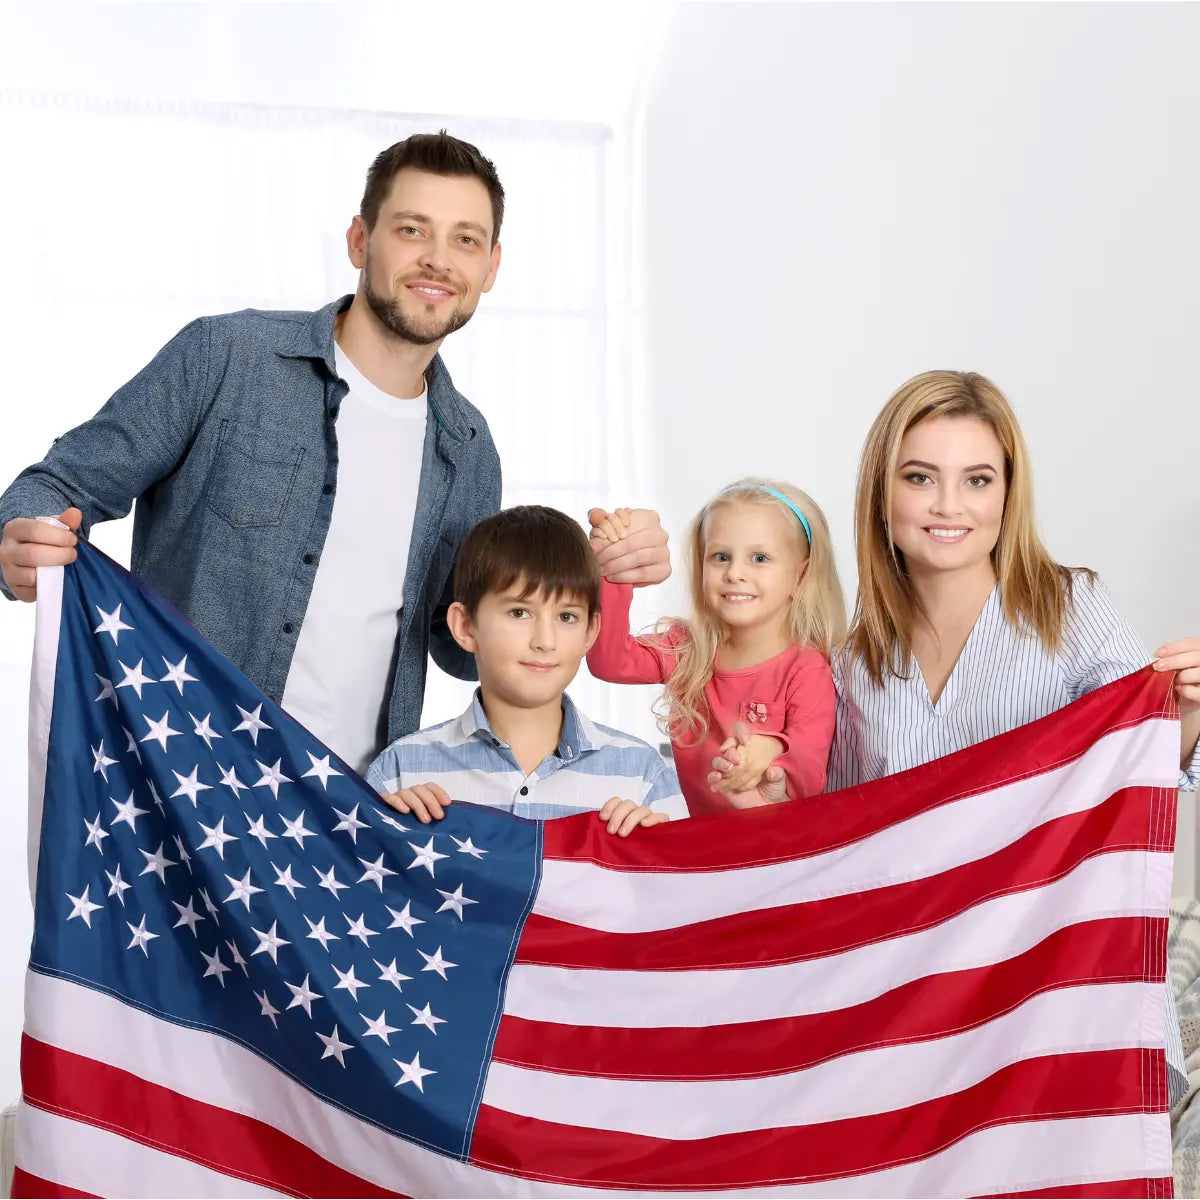 Patriotic Decor: Creative Ways To Display The American Flag At Home